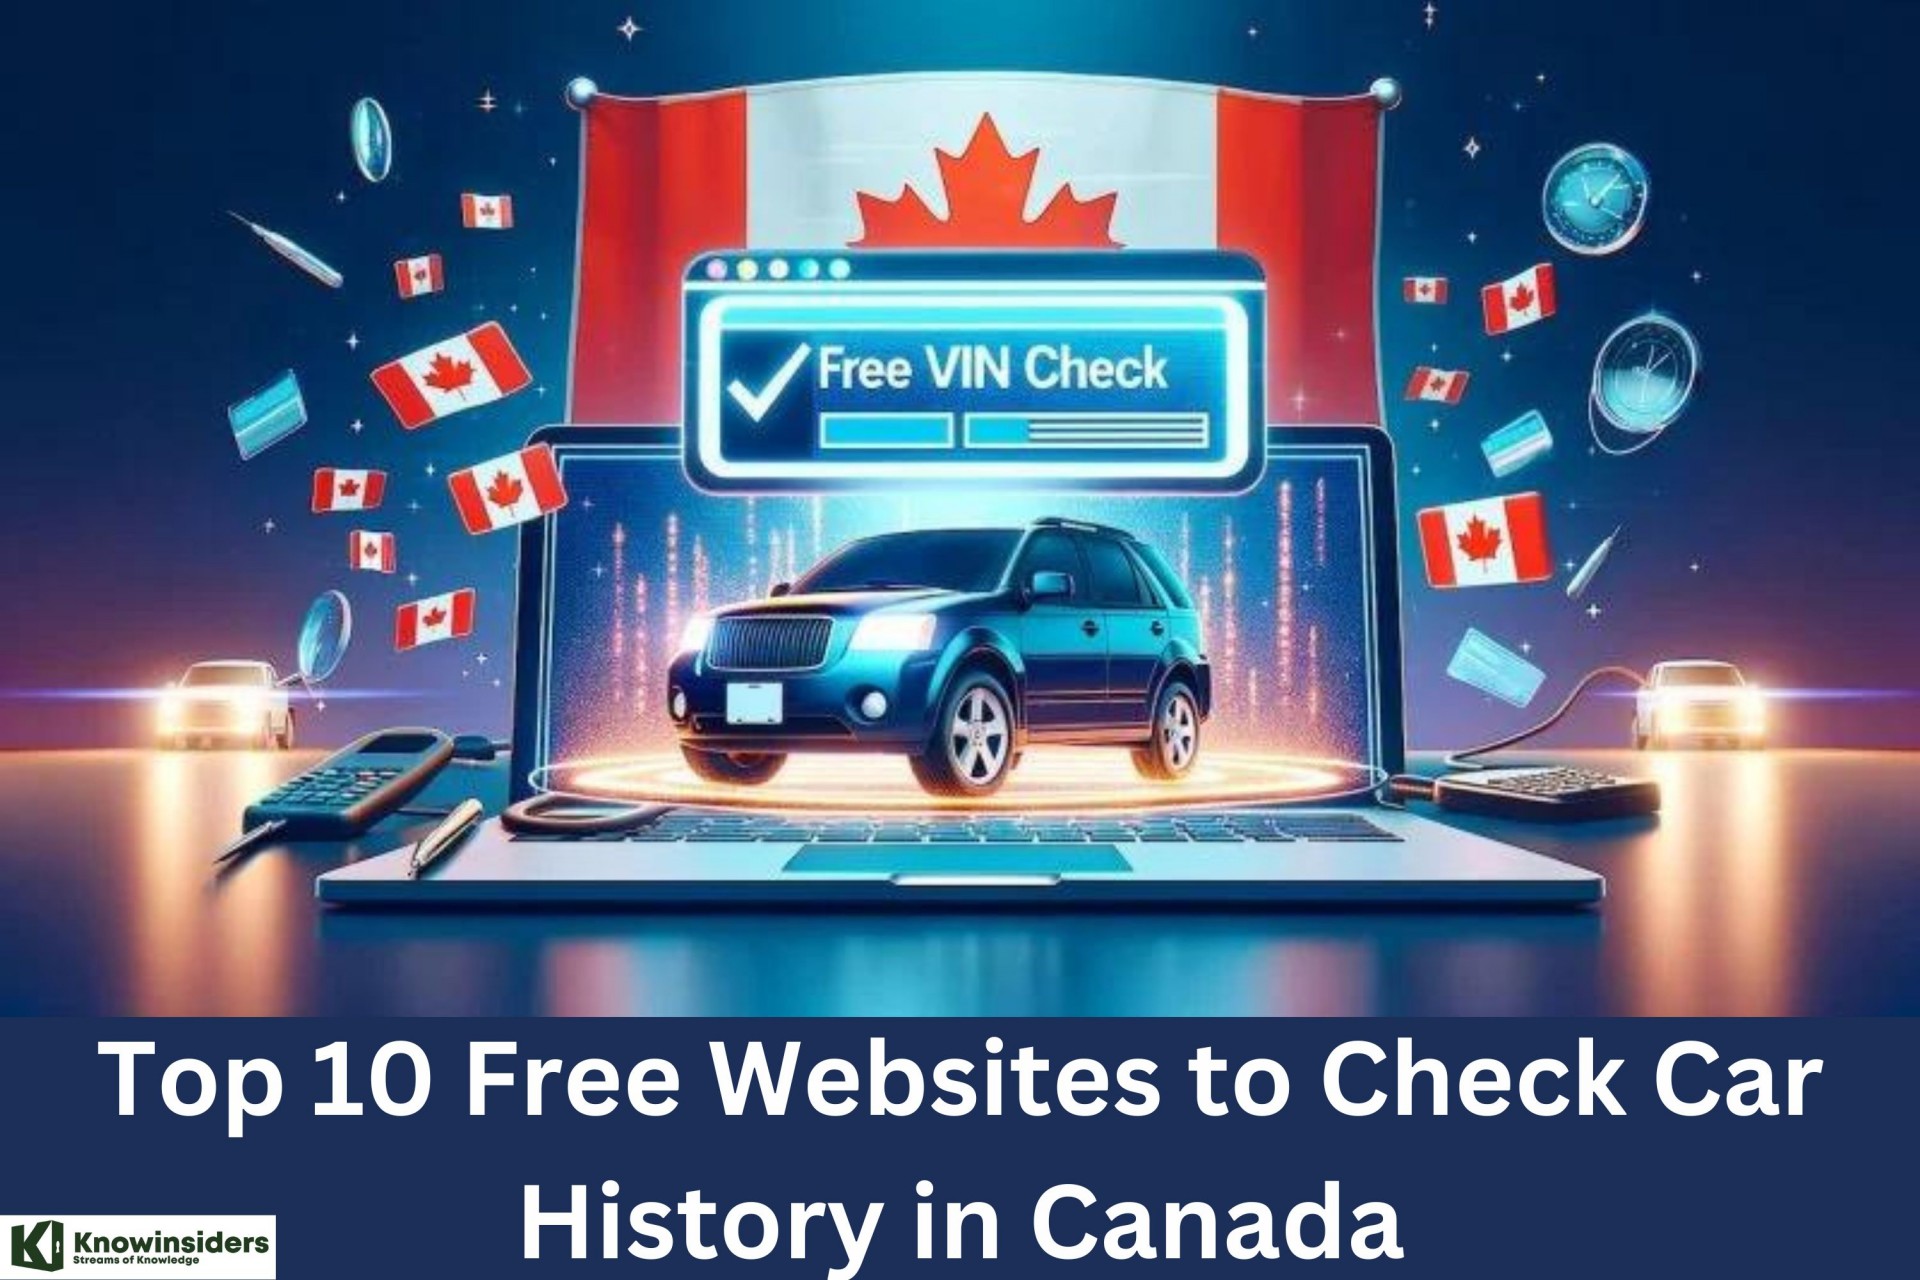 Top 10 Free Websites to Check Car History in Canada